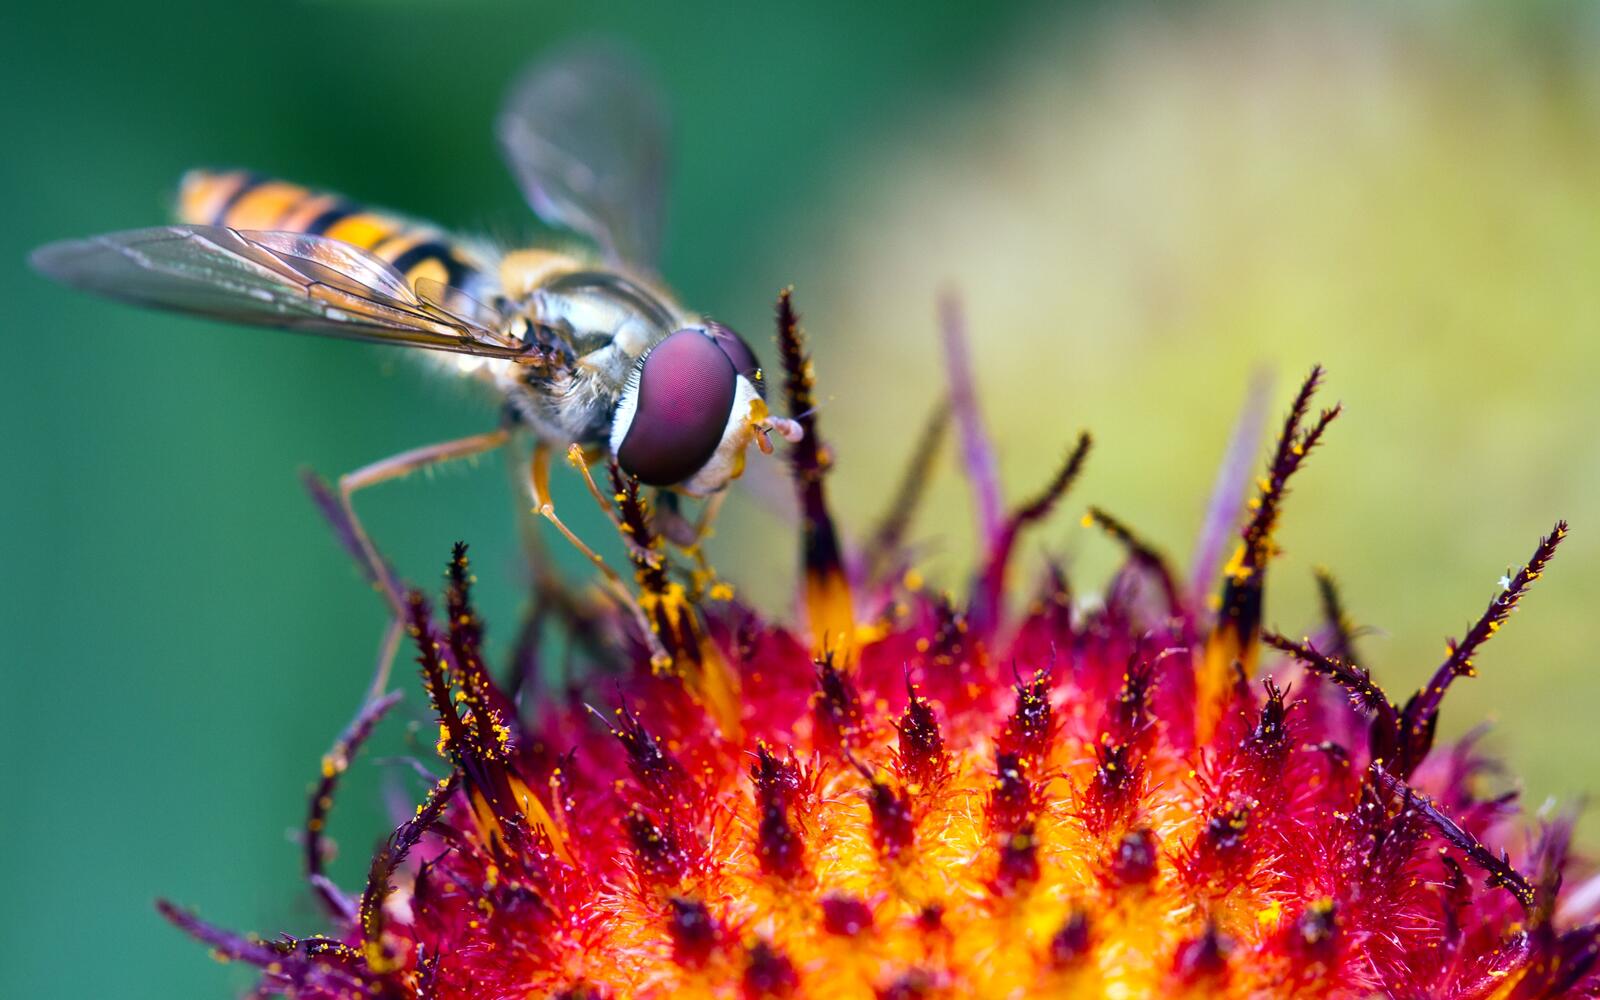 Wallpapers wallpaper hoverfly insects macro on the desktop